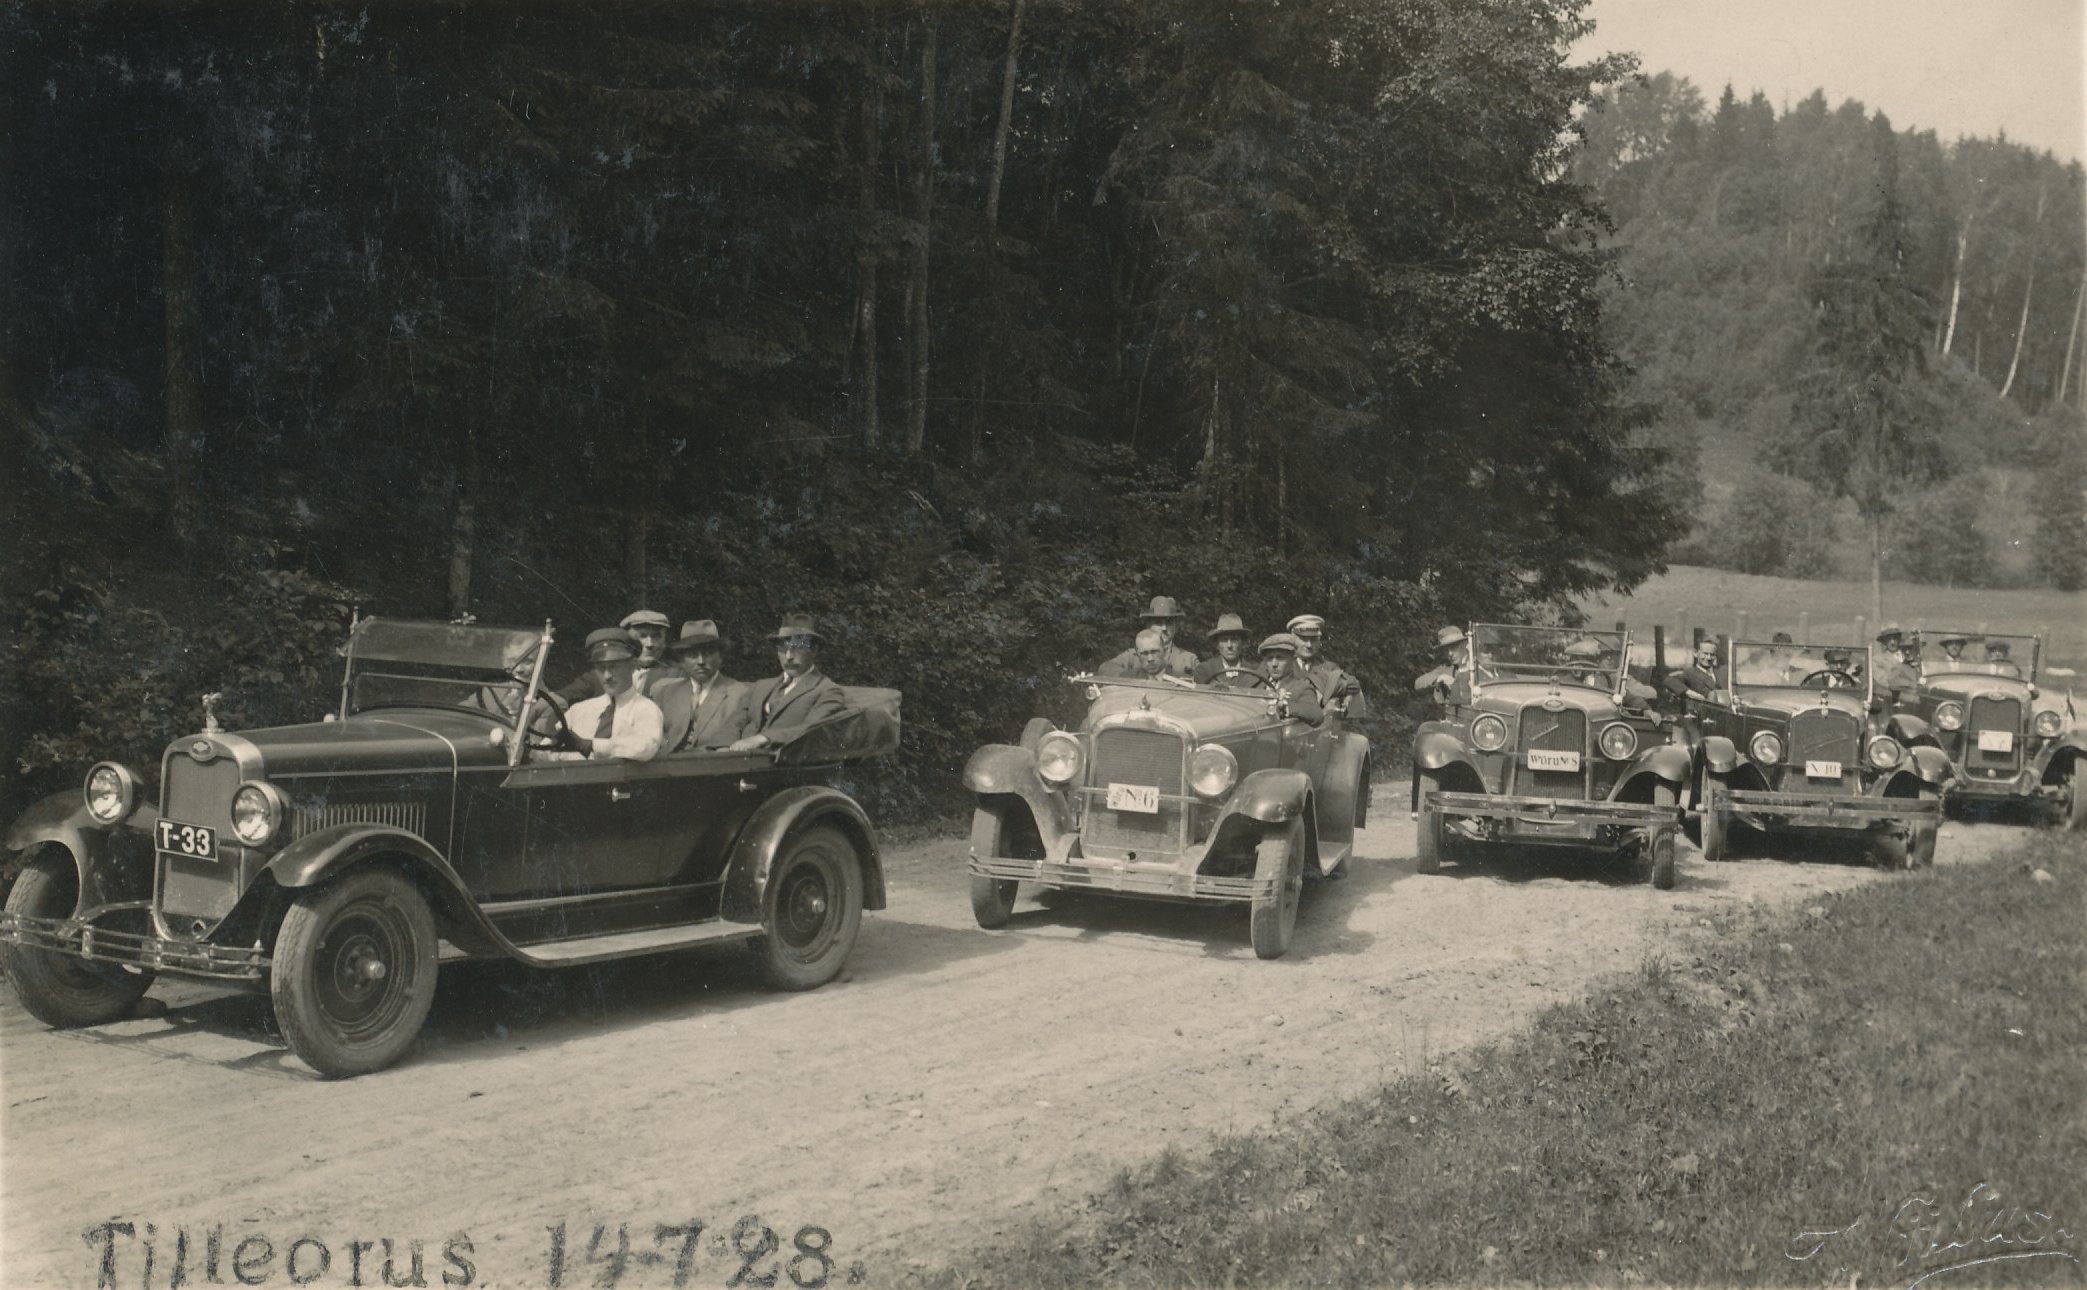 Photo.  Võru and other light passenger cars and taxis in Tilleor. 14.07.1928.in the second car, Võru rural elder August Kohver with a left cable.